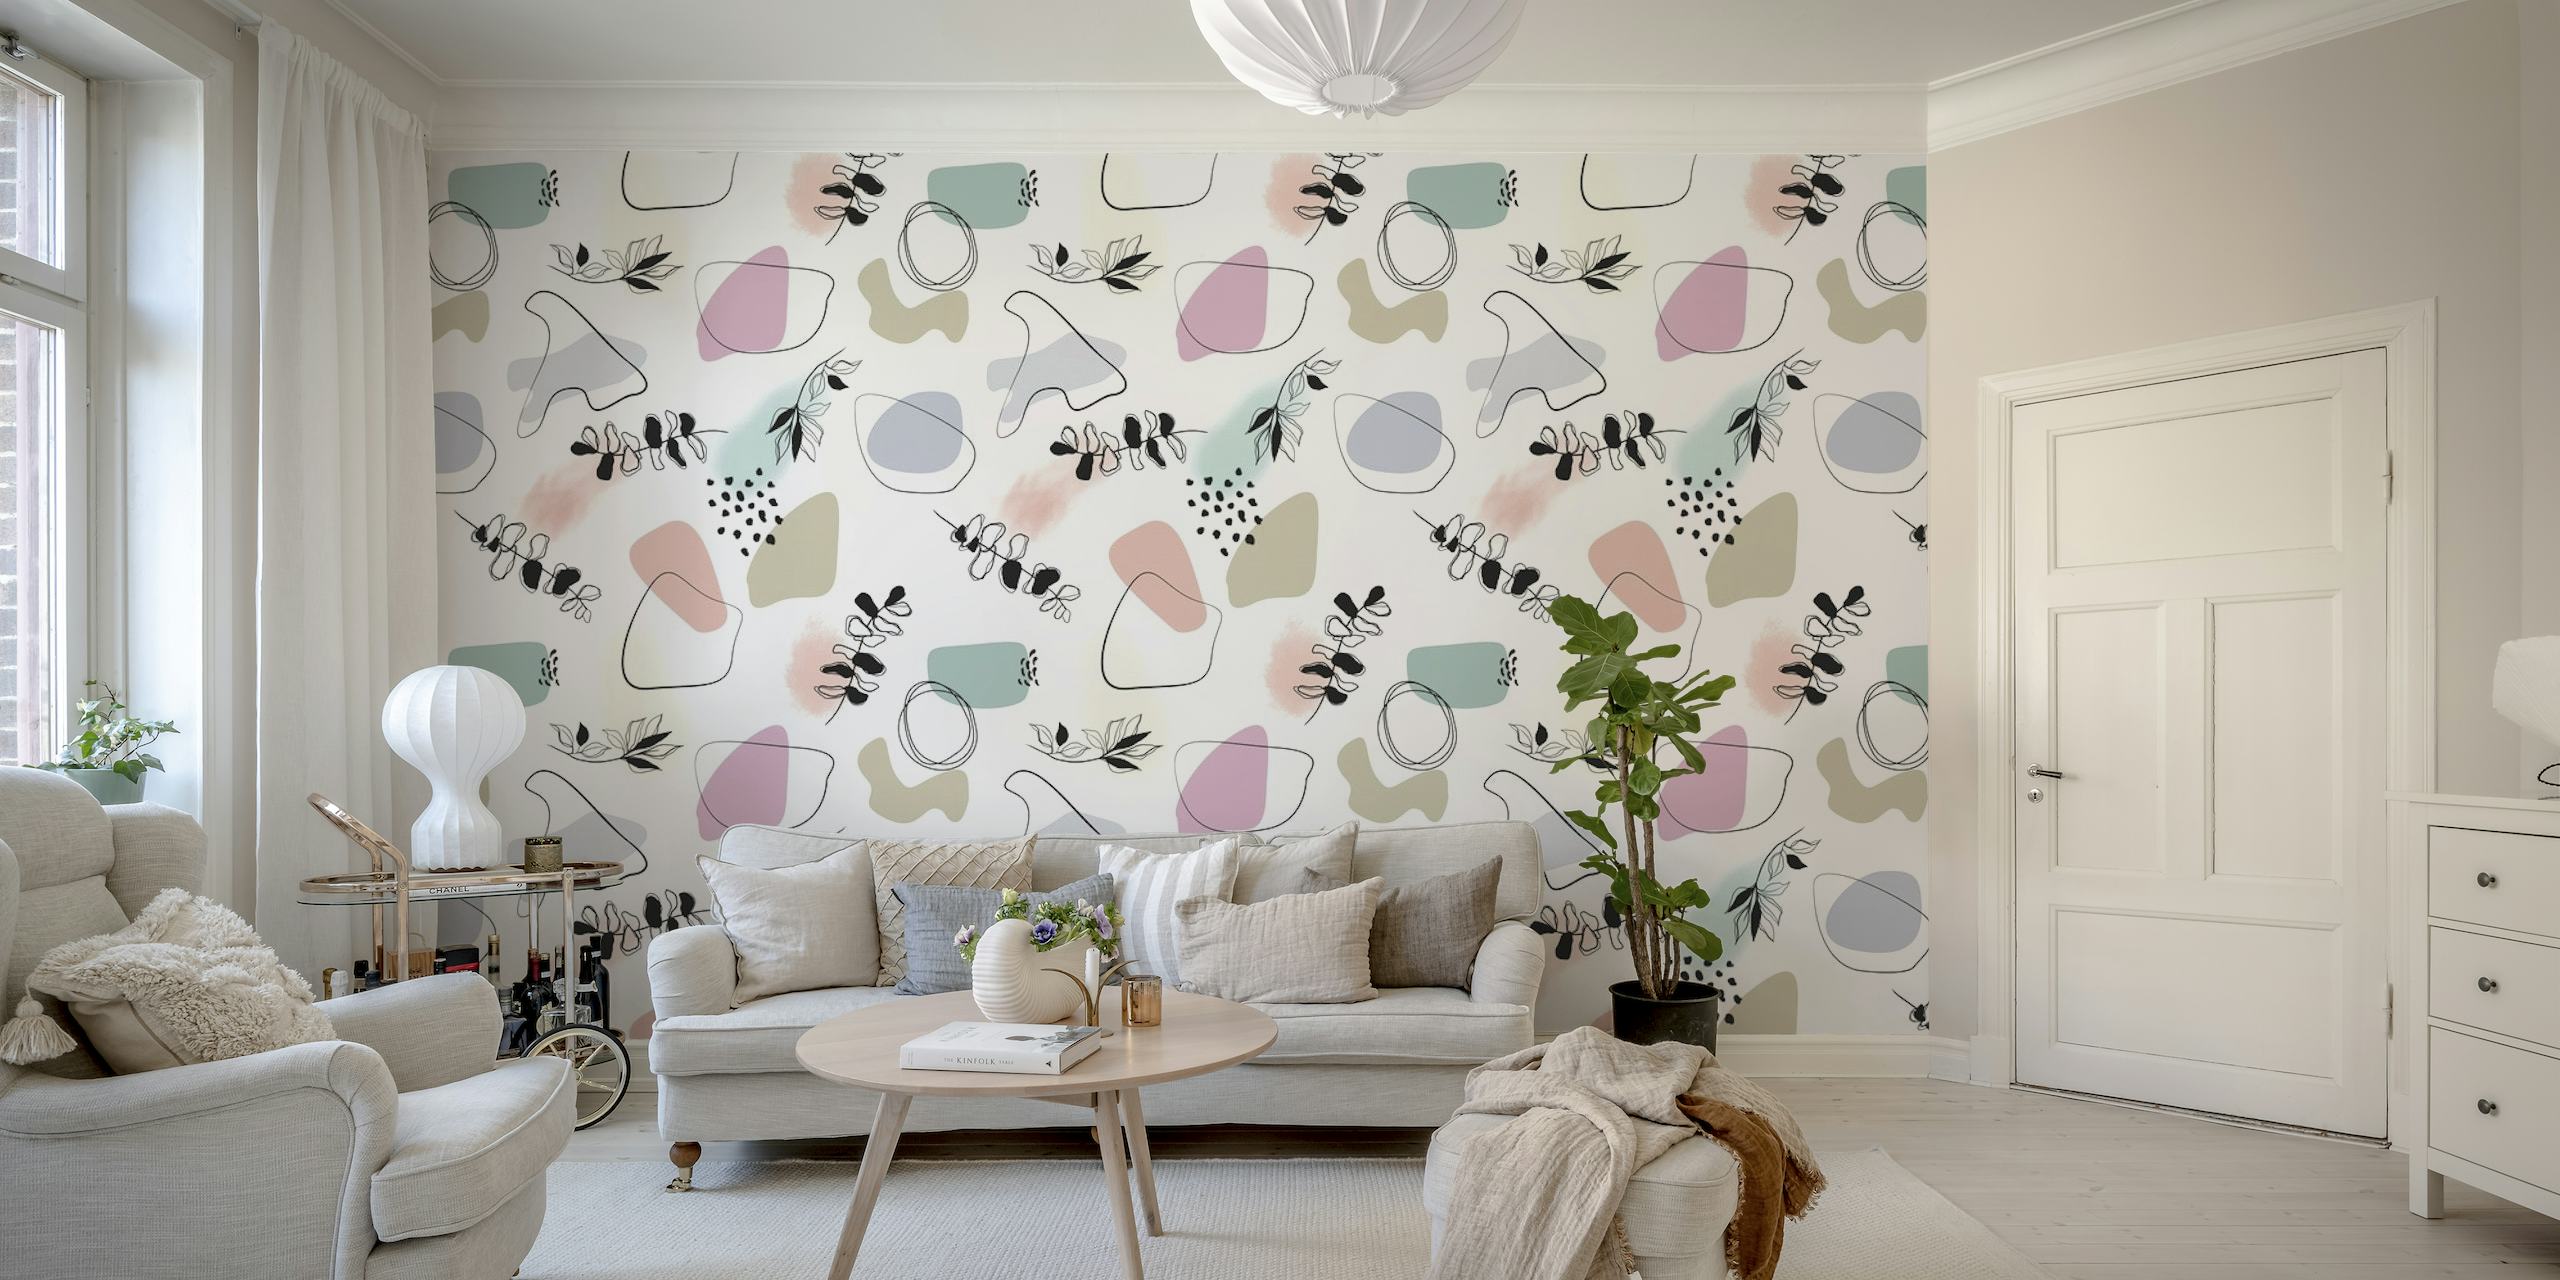 Modern abstract geometric wall mural with pastel shapes and patterns